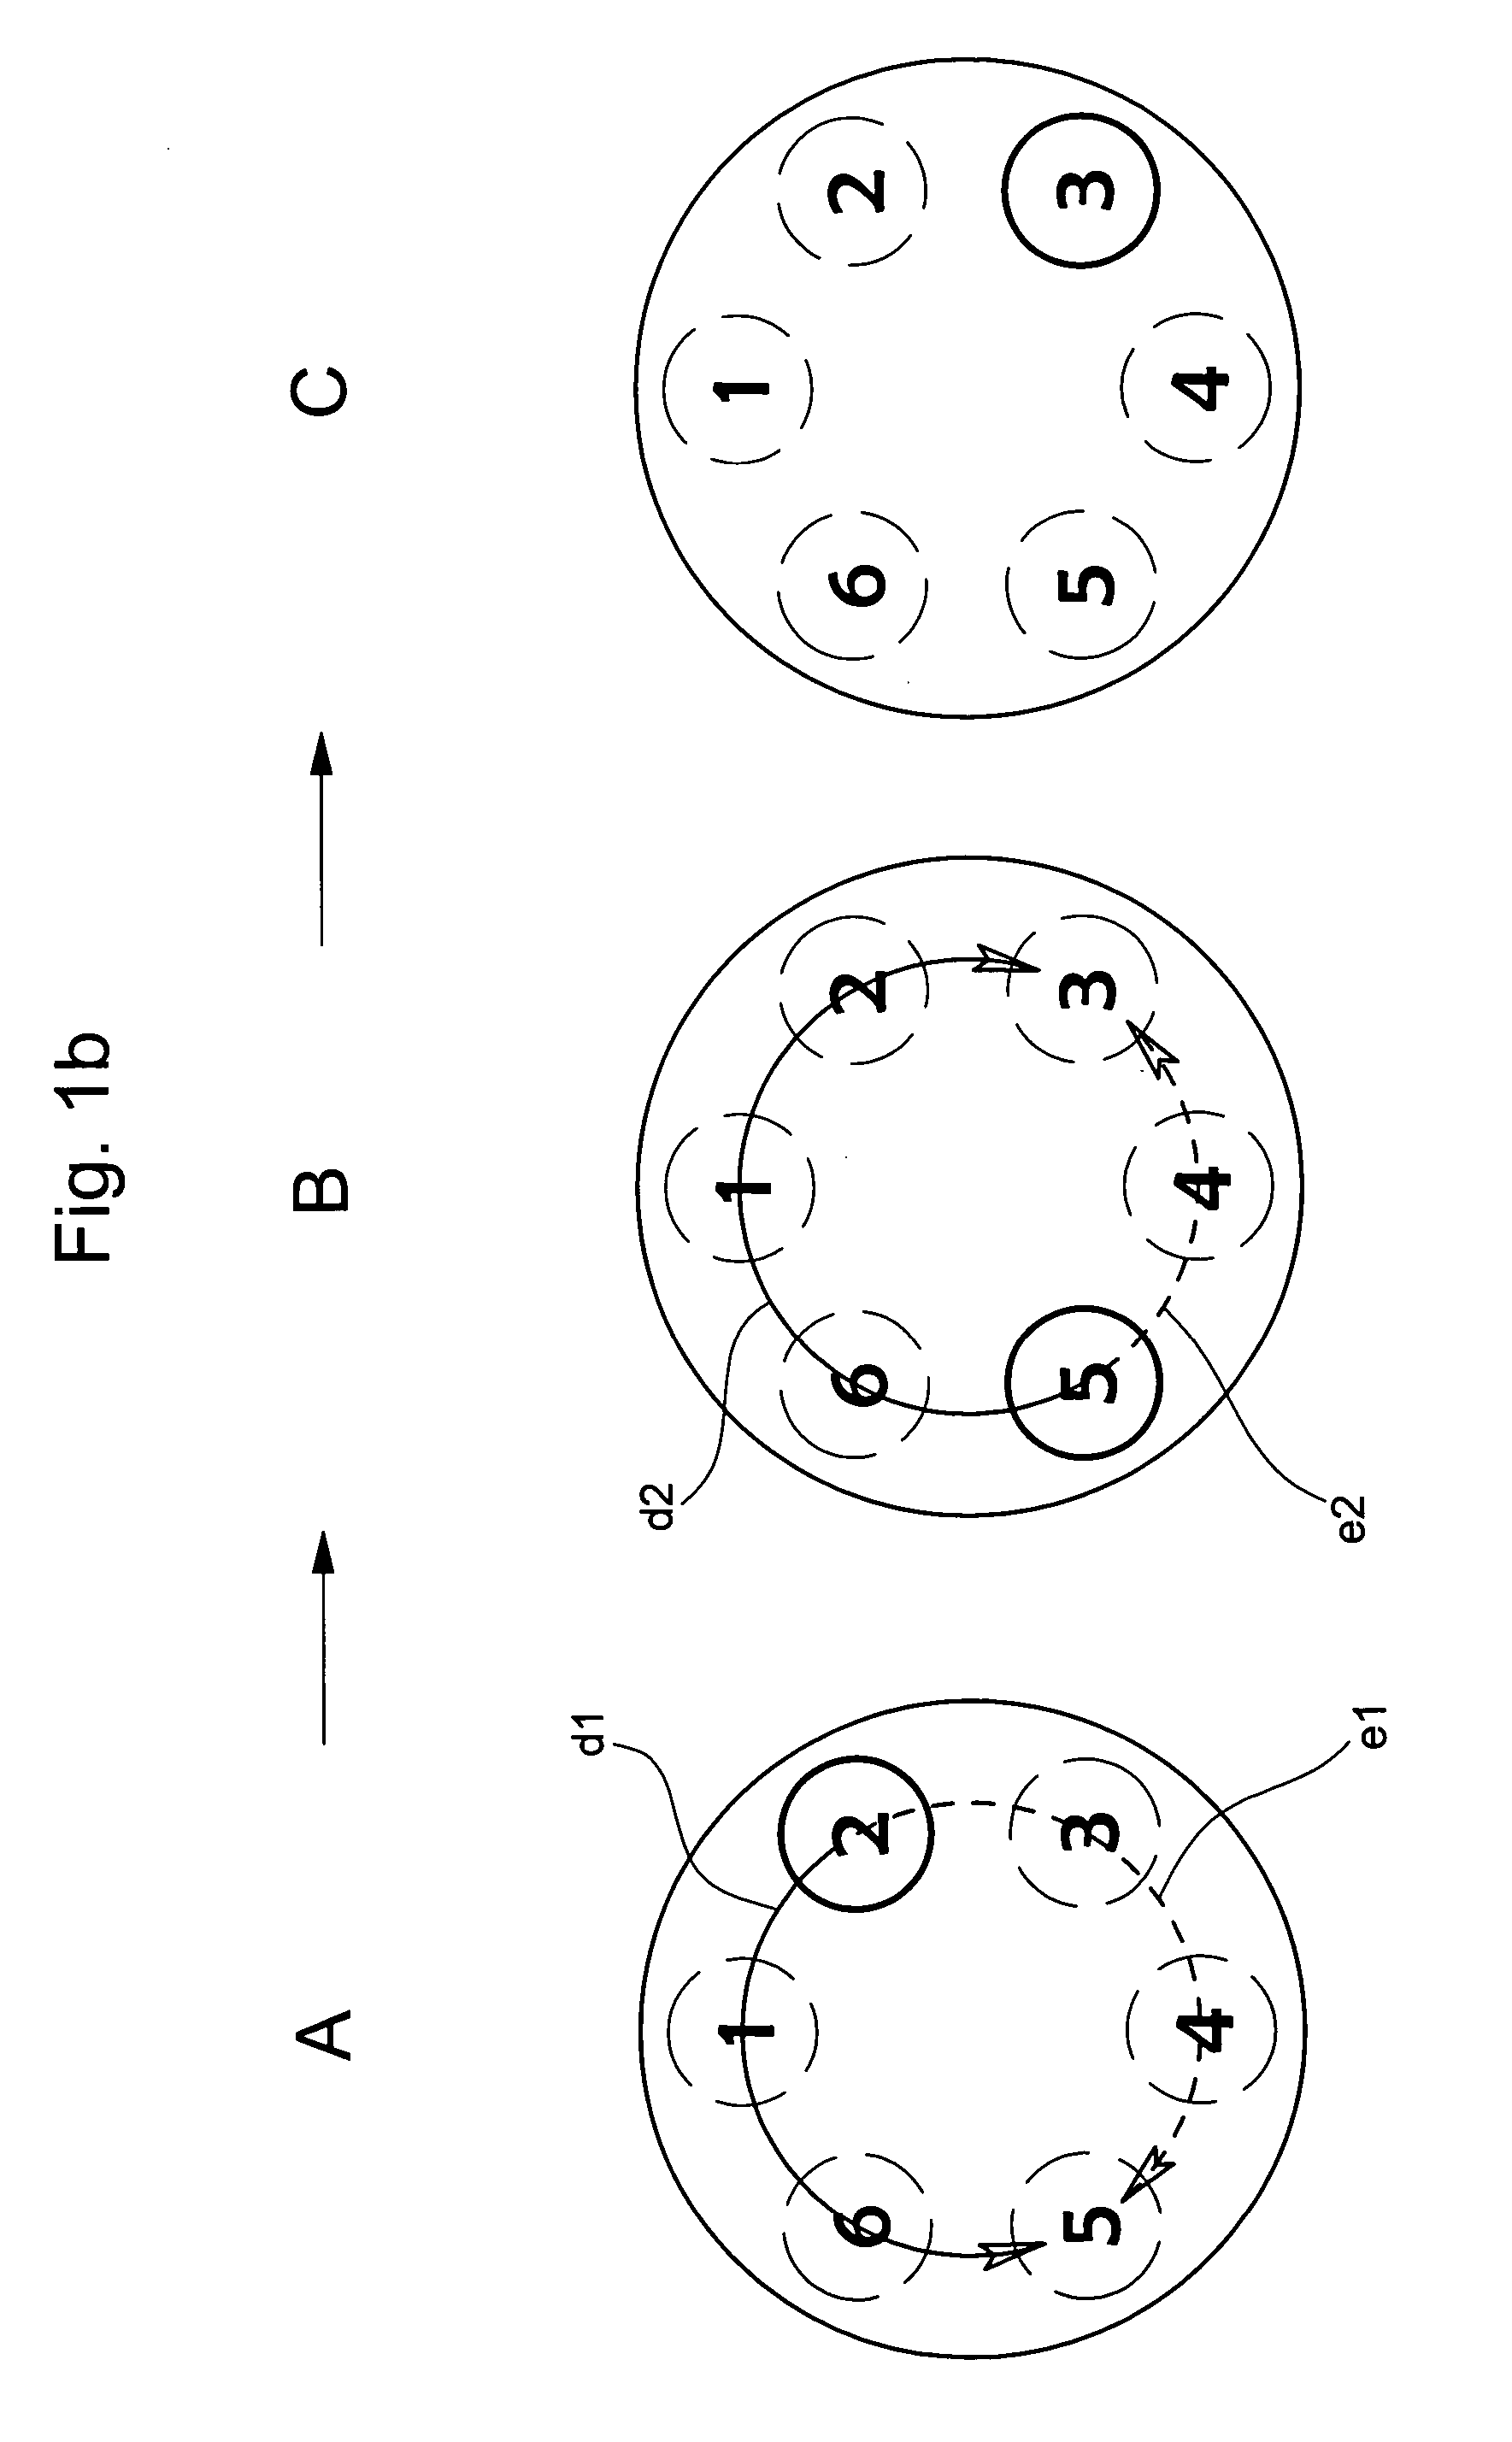 Method of input of a security code by means of a touch screen for access to a function, an apparatus or a given location, and device for implementing the same